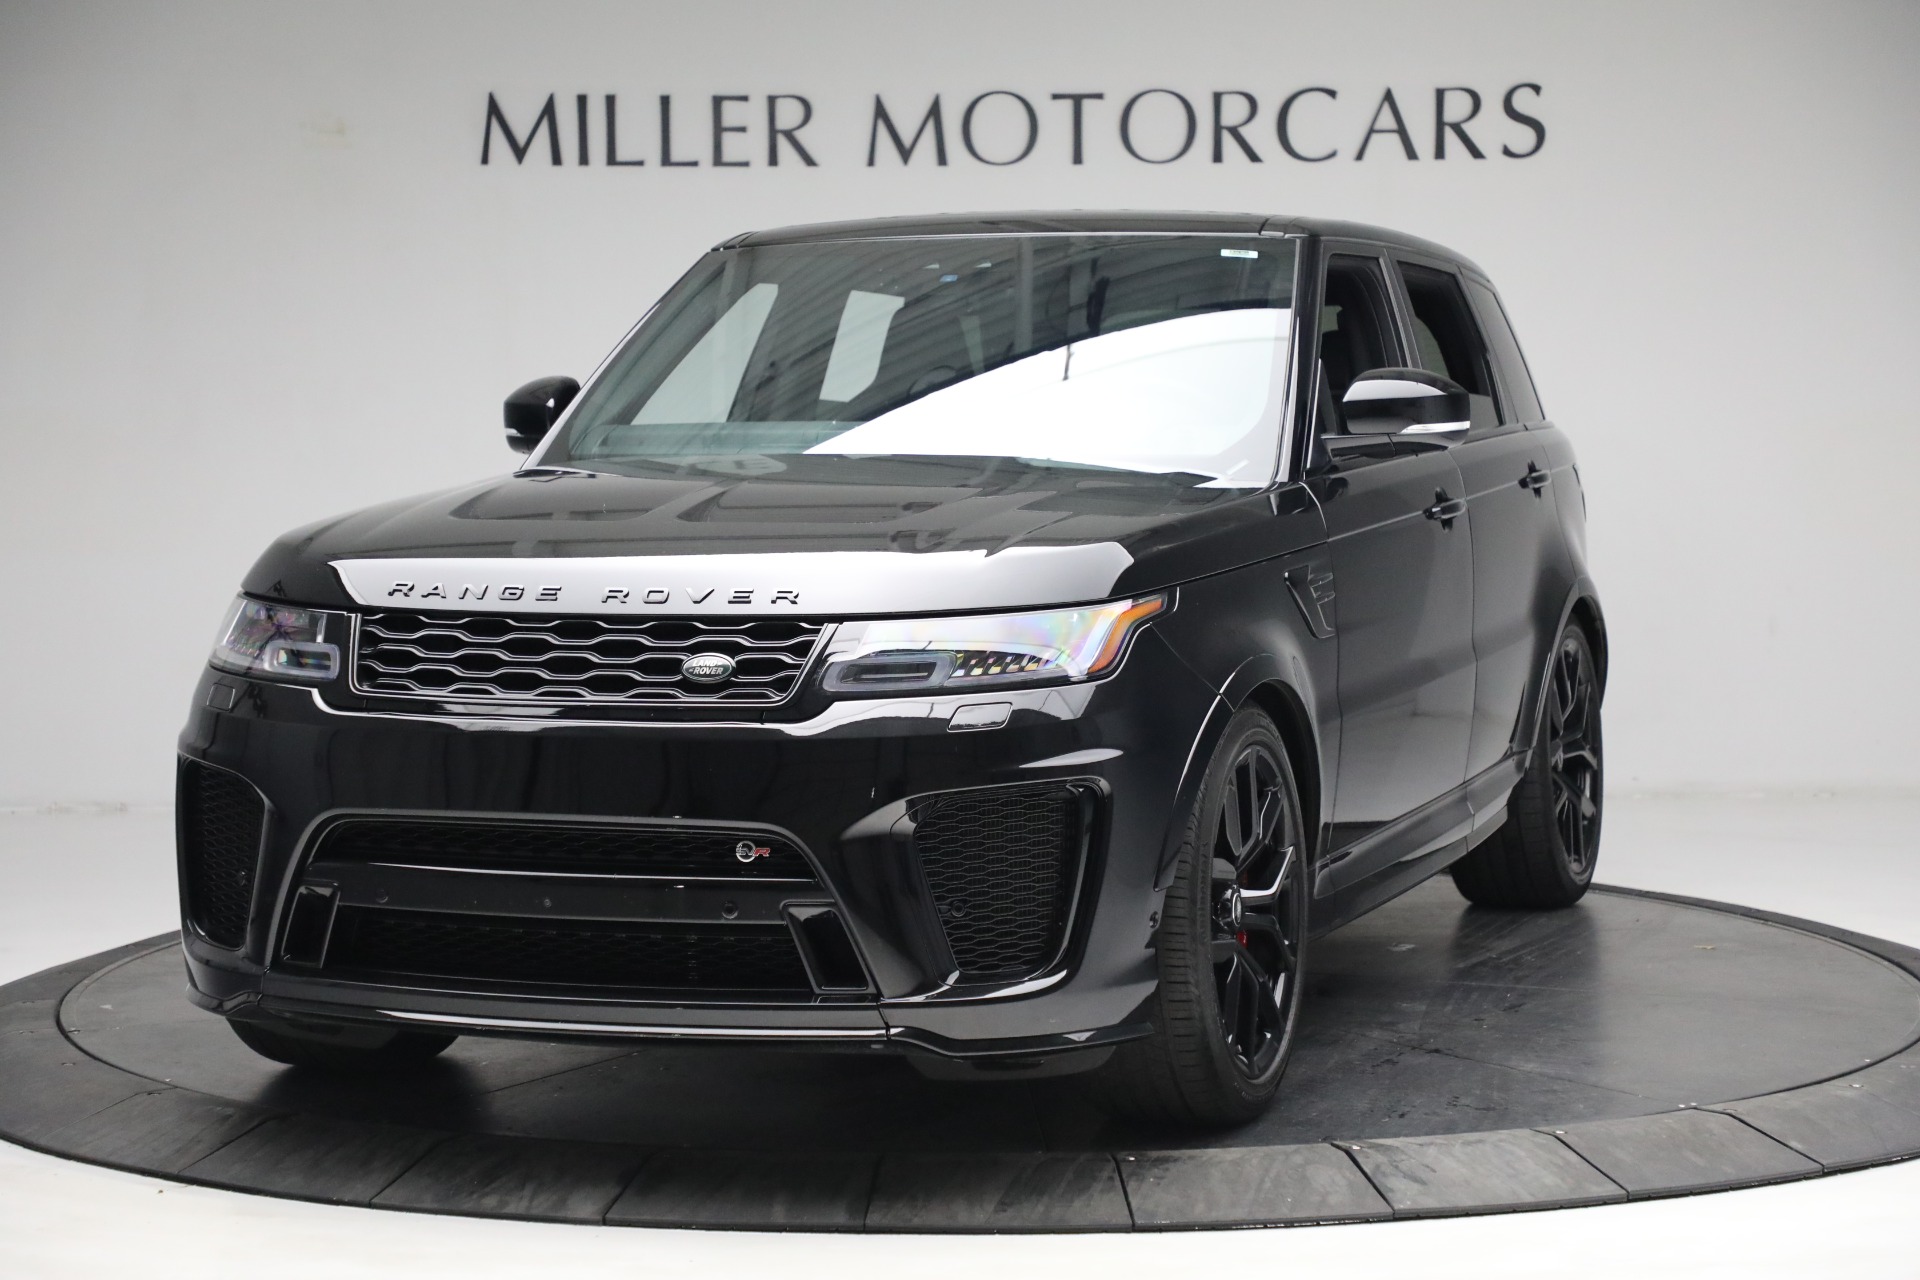 Used 2020 Land Rover Range Rover Sport SVR for sale $111,900 at Rolls-Royce Motor Cars Greenwich in Greenwich CT 06830 1